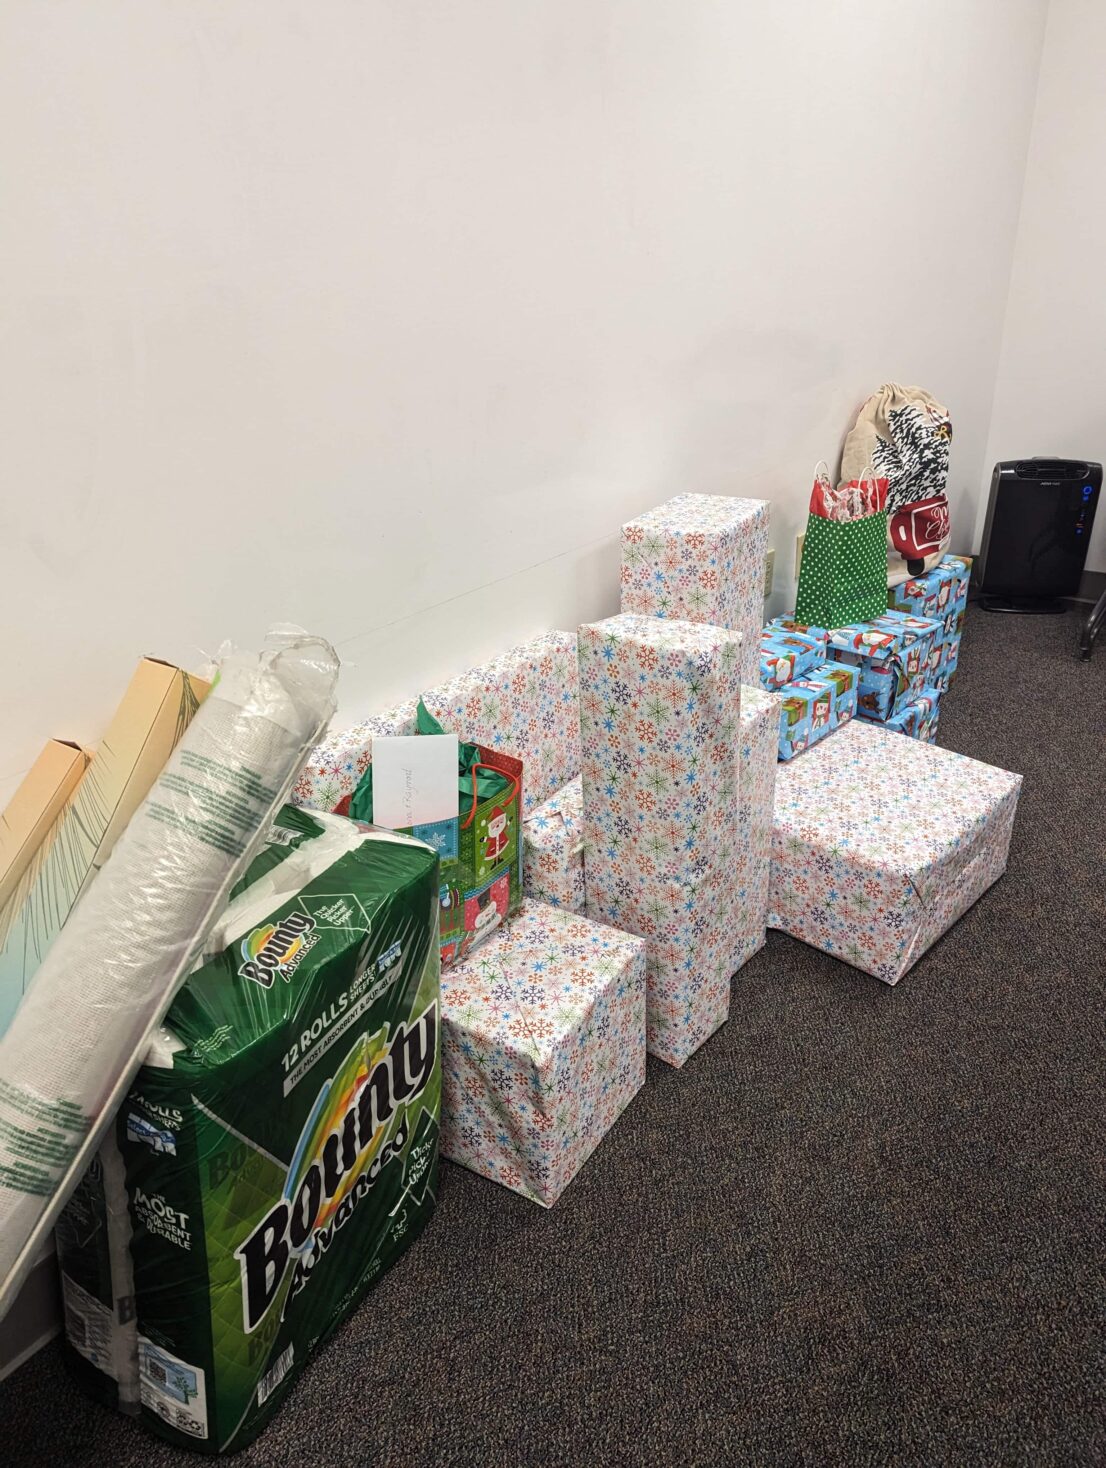 Two long tall boxes and a rolled up rug in plastic lean on a 12 pack of paper towels. Next to this there are about 15 gifts wrapped in white snowflake and blue santa wrapping paper. On top of two green gift bags. One has santa and snow men on it and the other has whilte polka dots. At the far end there is a brown fabric gift bag. Everything is lined up against the wall.